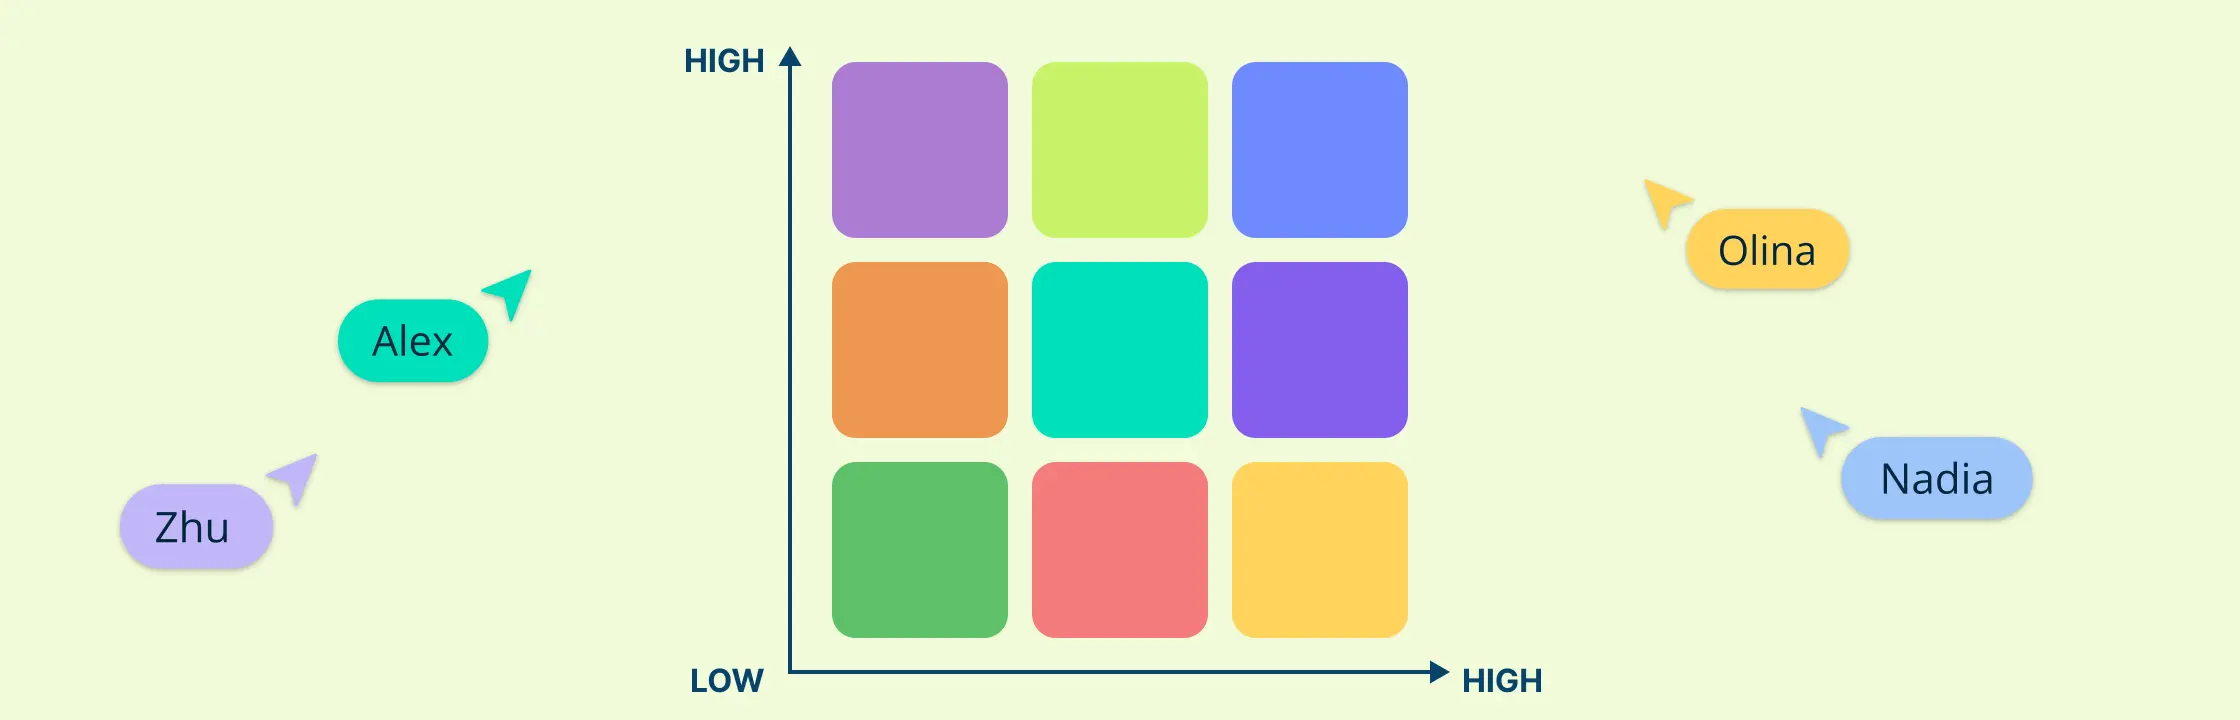 9 Box Grid: How to Use it for Your Talent Management